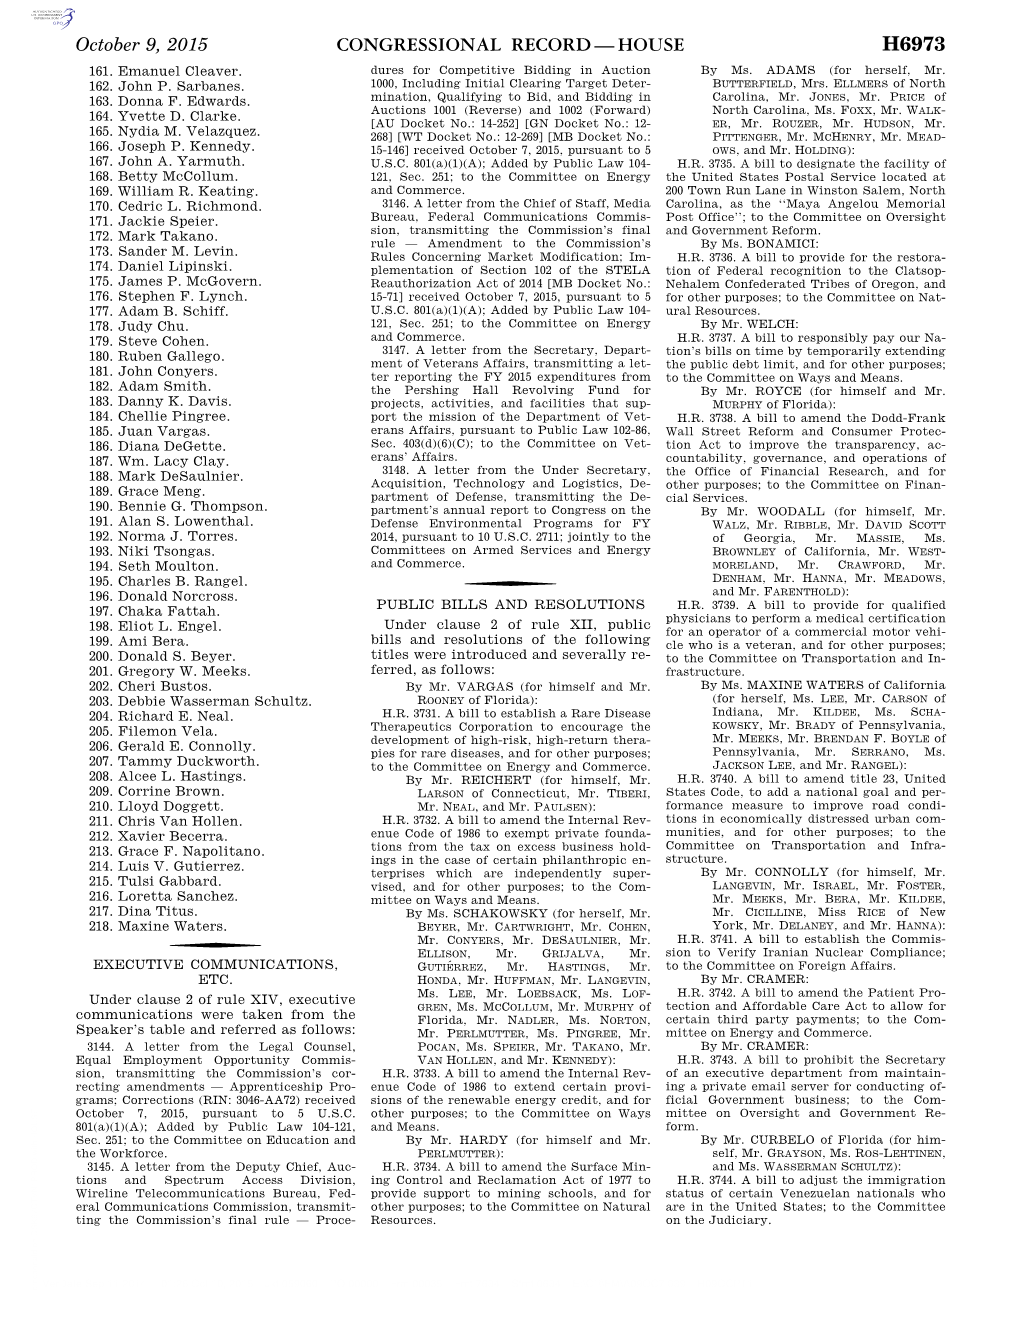 Congressional Record—House H6973